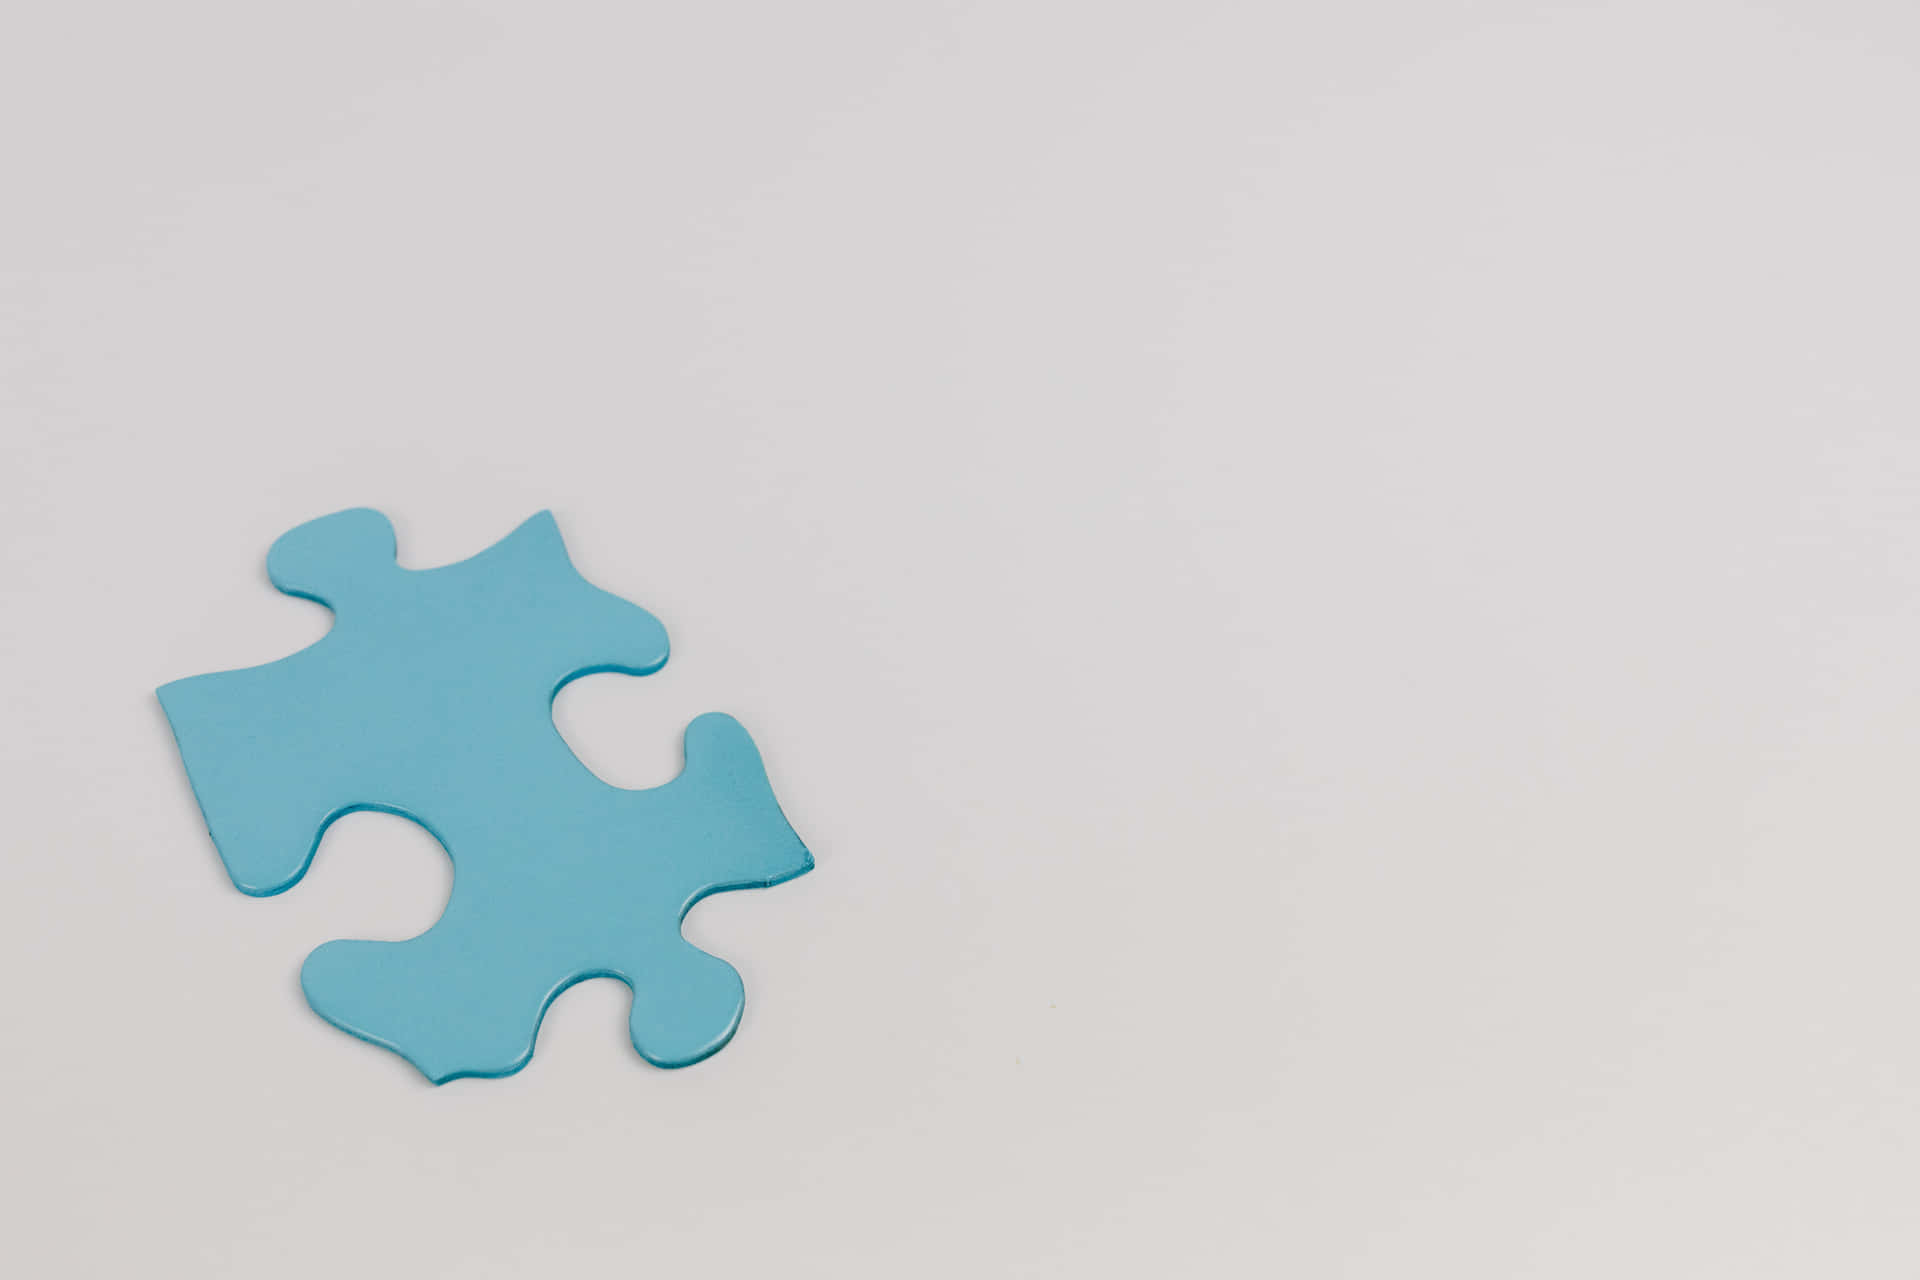 A Blue Puzzle Piece On A White Background